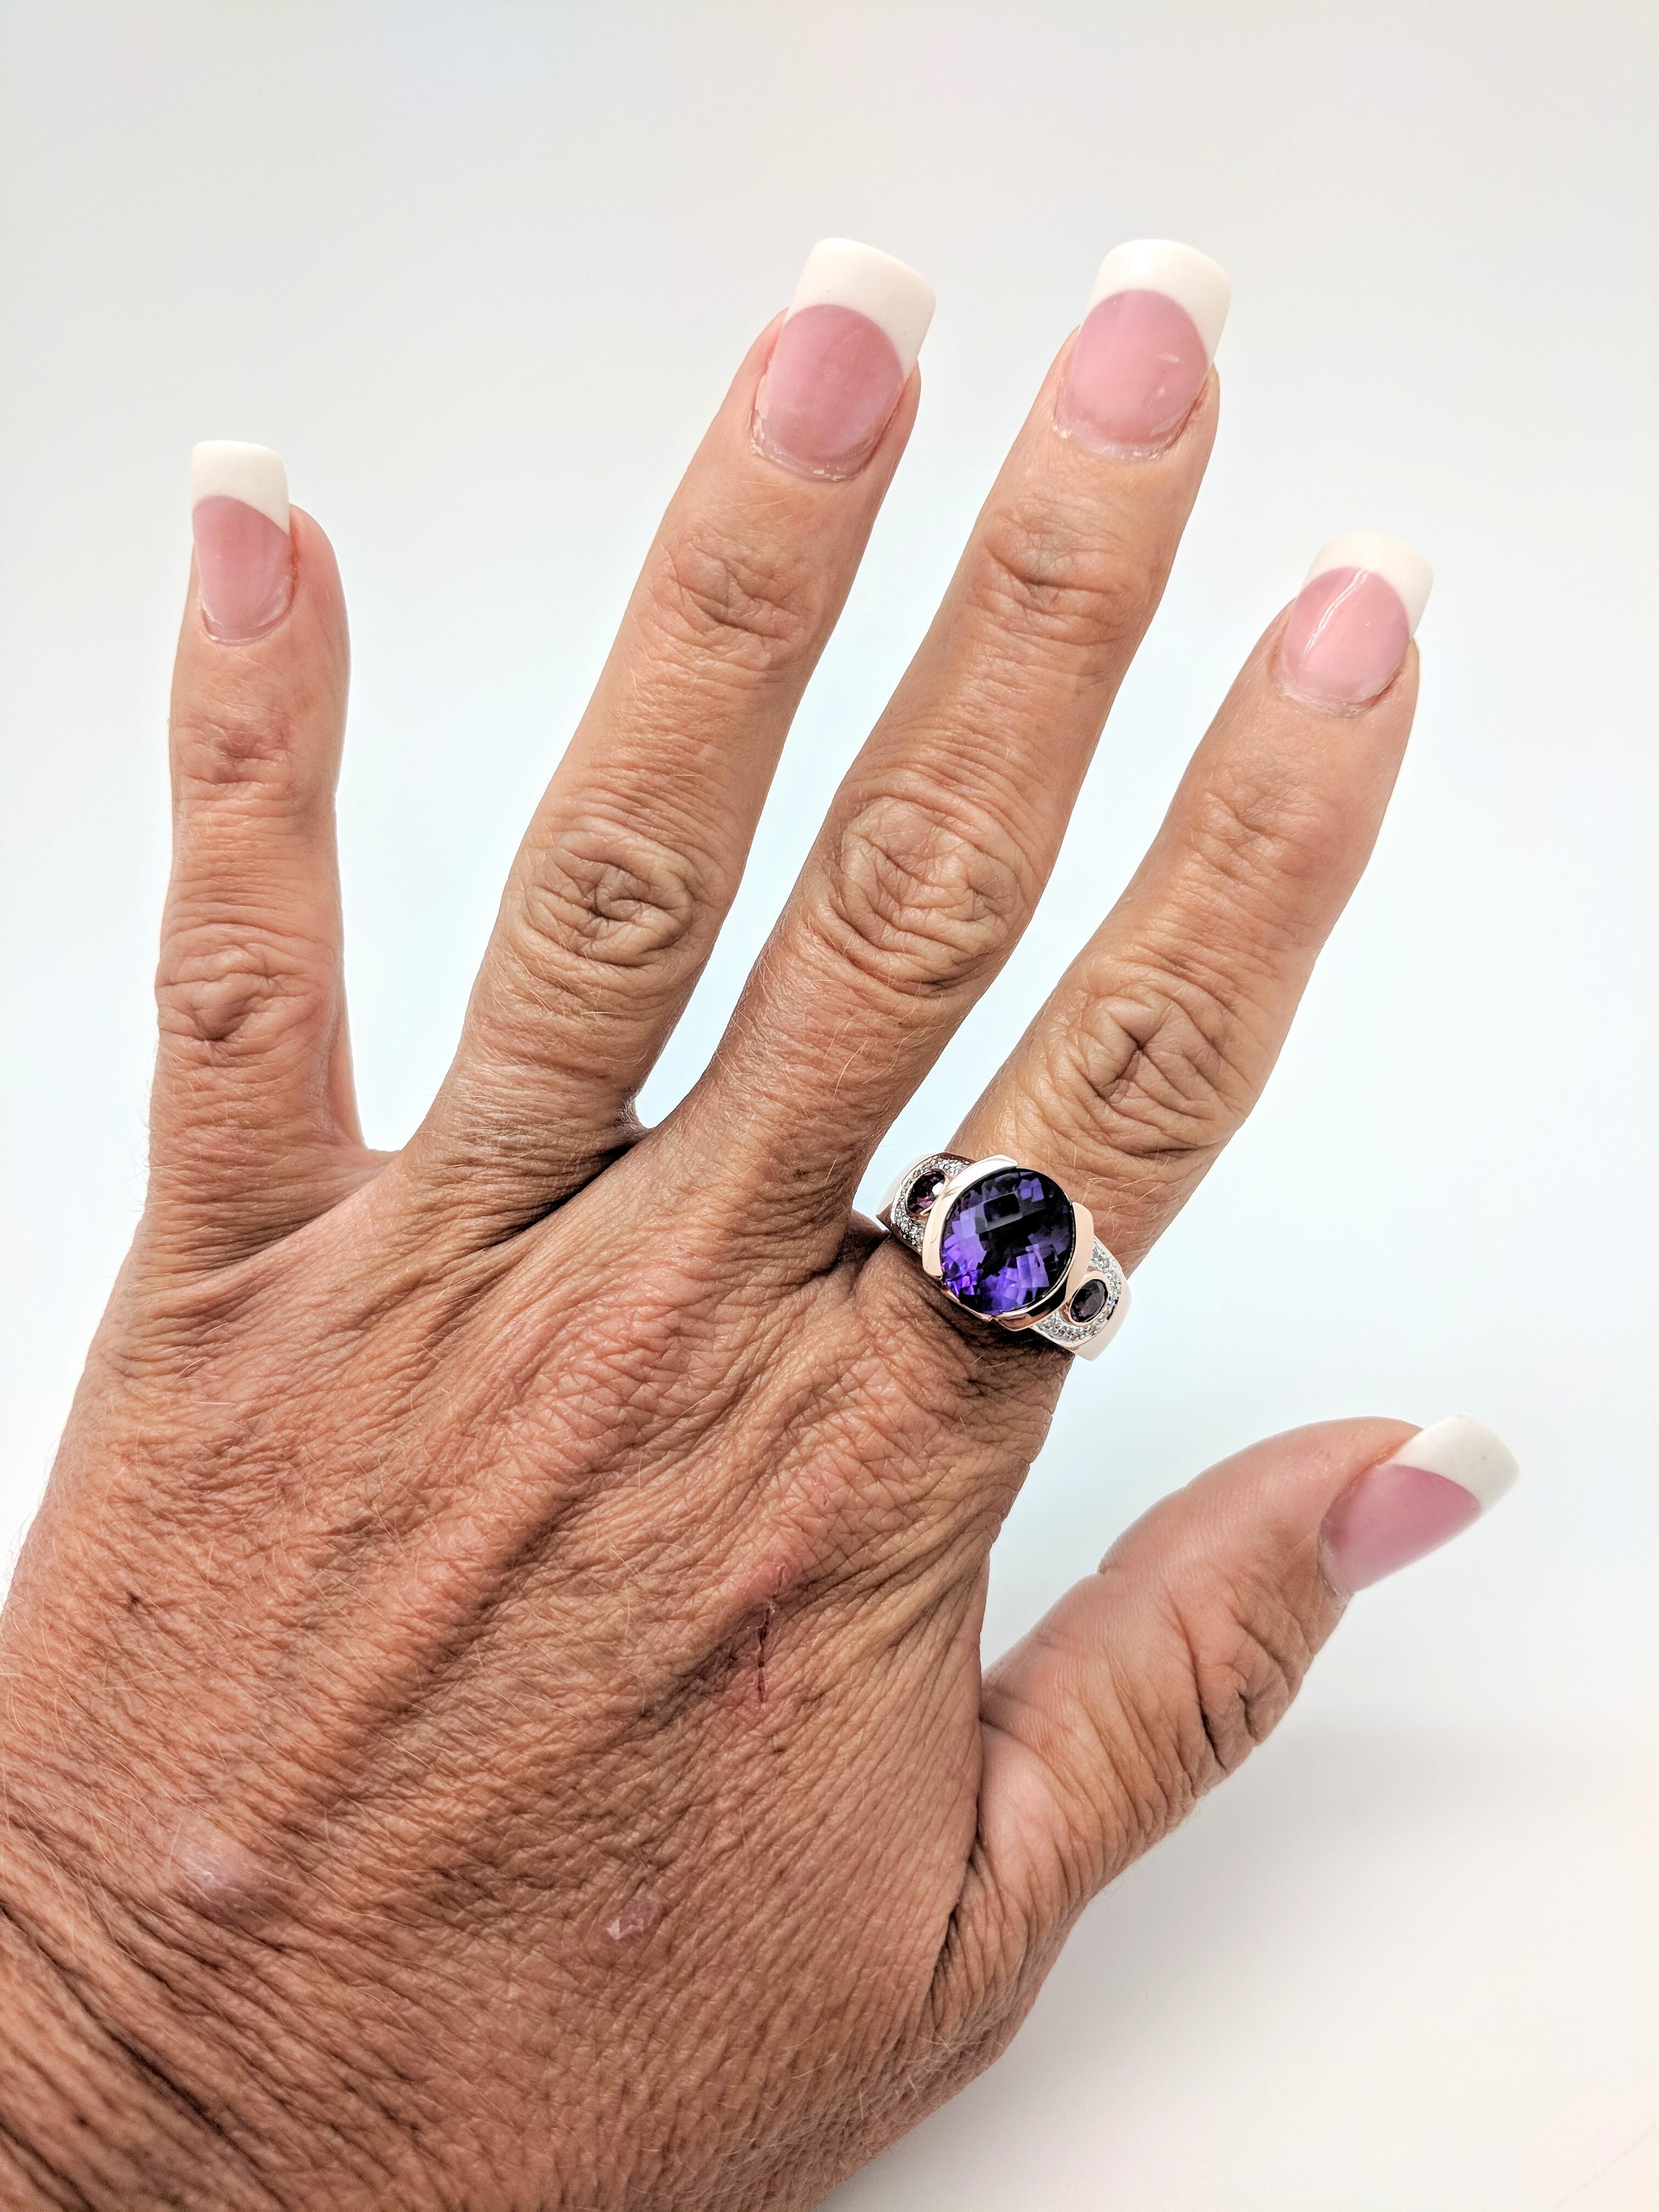 You are viewing a beautiful amethyst and diamond right hand ring. Any woman would love to add this piece to their collection! This ring is crafted from 14k rose gold and weighs 8.9 grams. It features (1) 12x10mm half bezel set oval prism cut